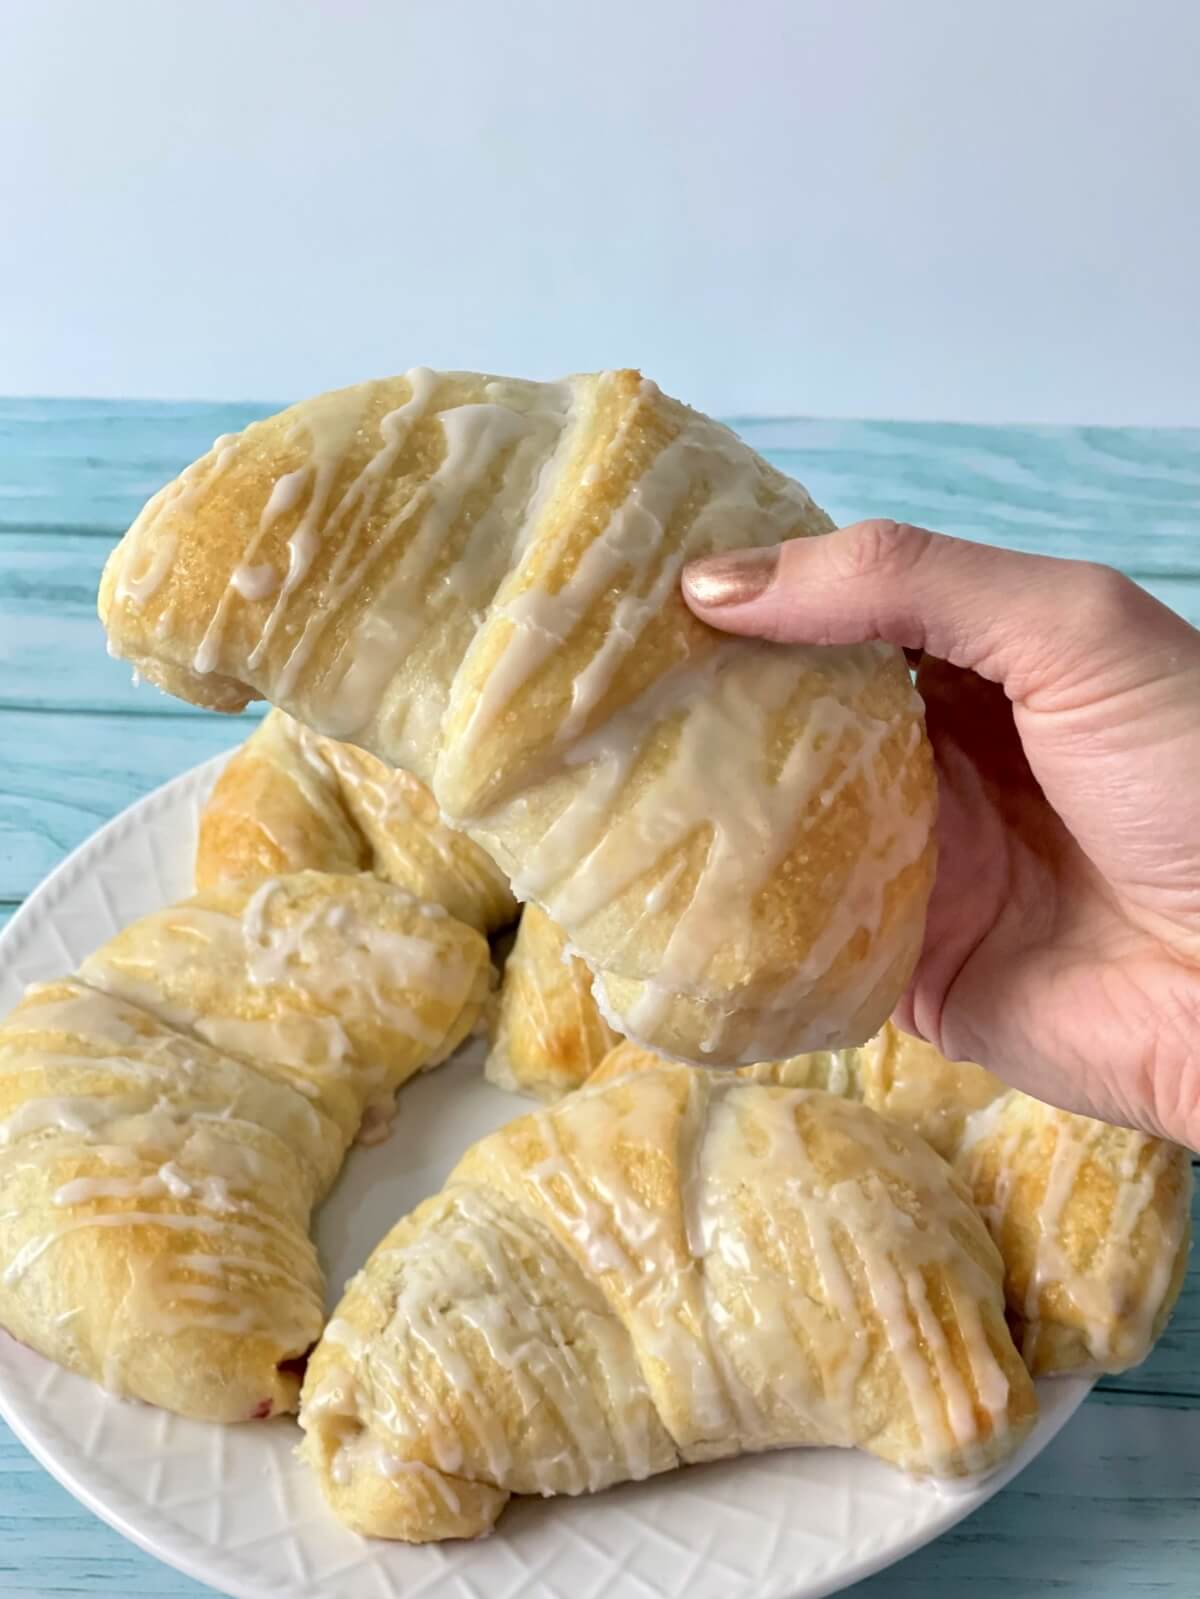 A picture with a hand holding a large danish with cream cheese filling, with a plate of danish drizzled with a powdered sugar glaze in the background.